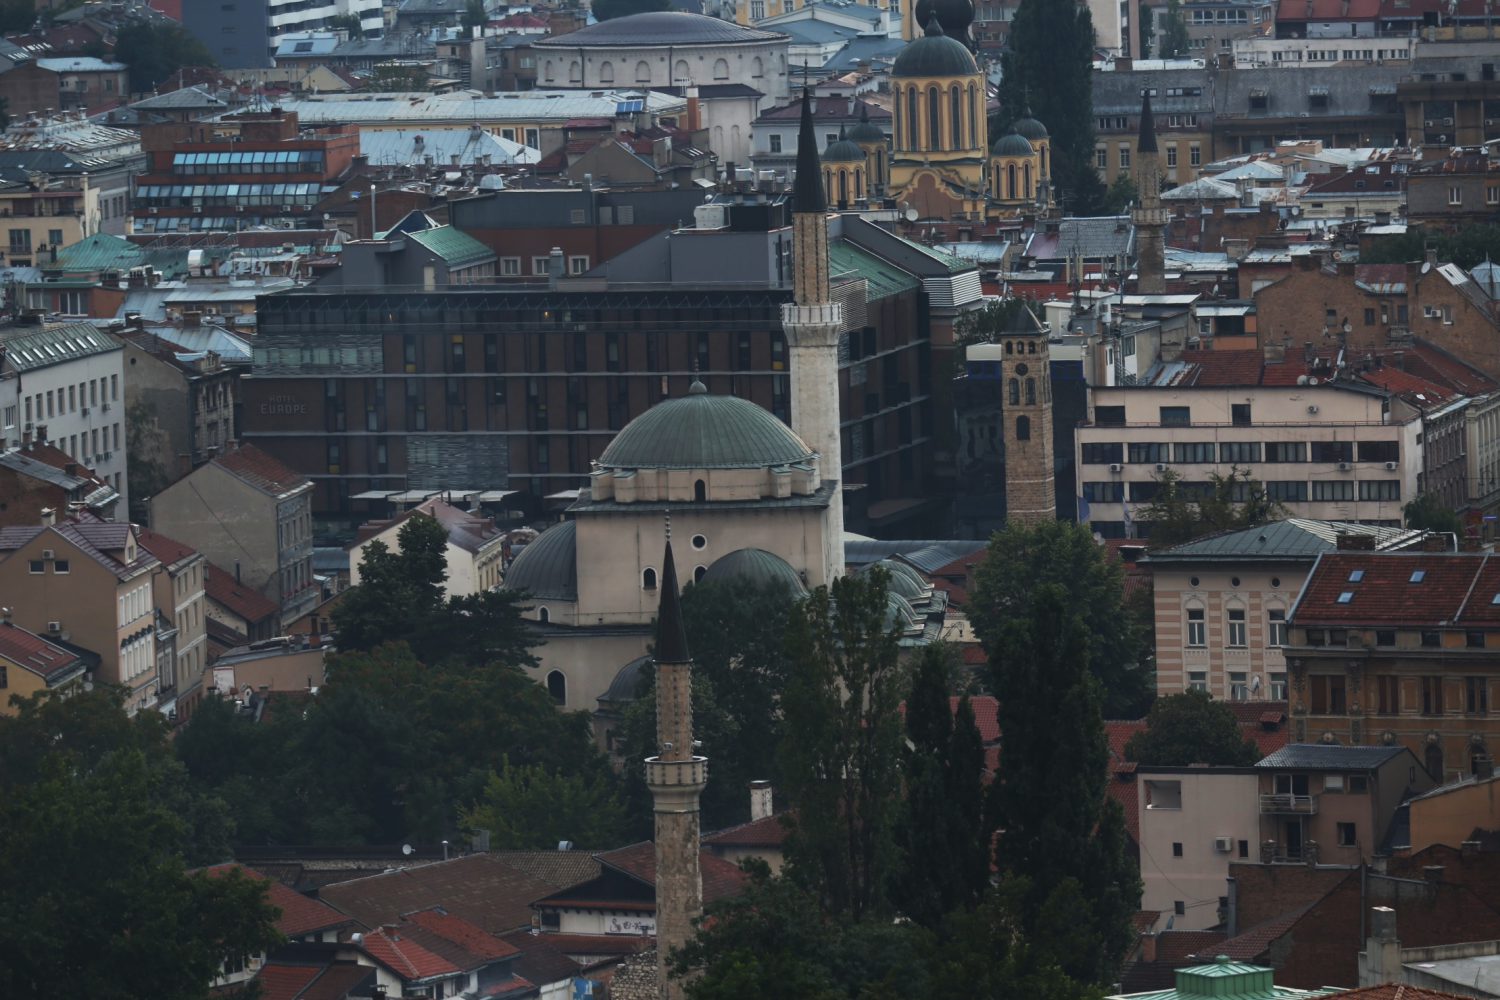 View of Sarajevo's skyline with mosques and historical buildings